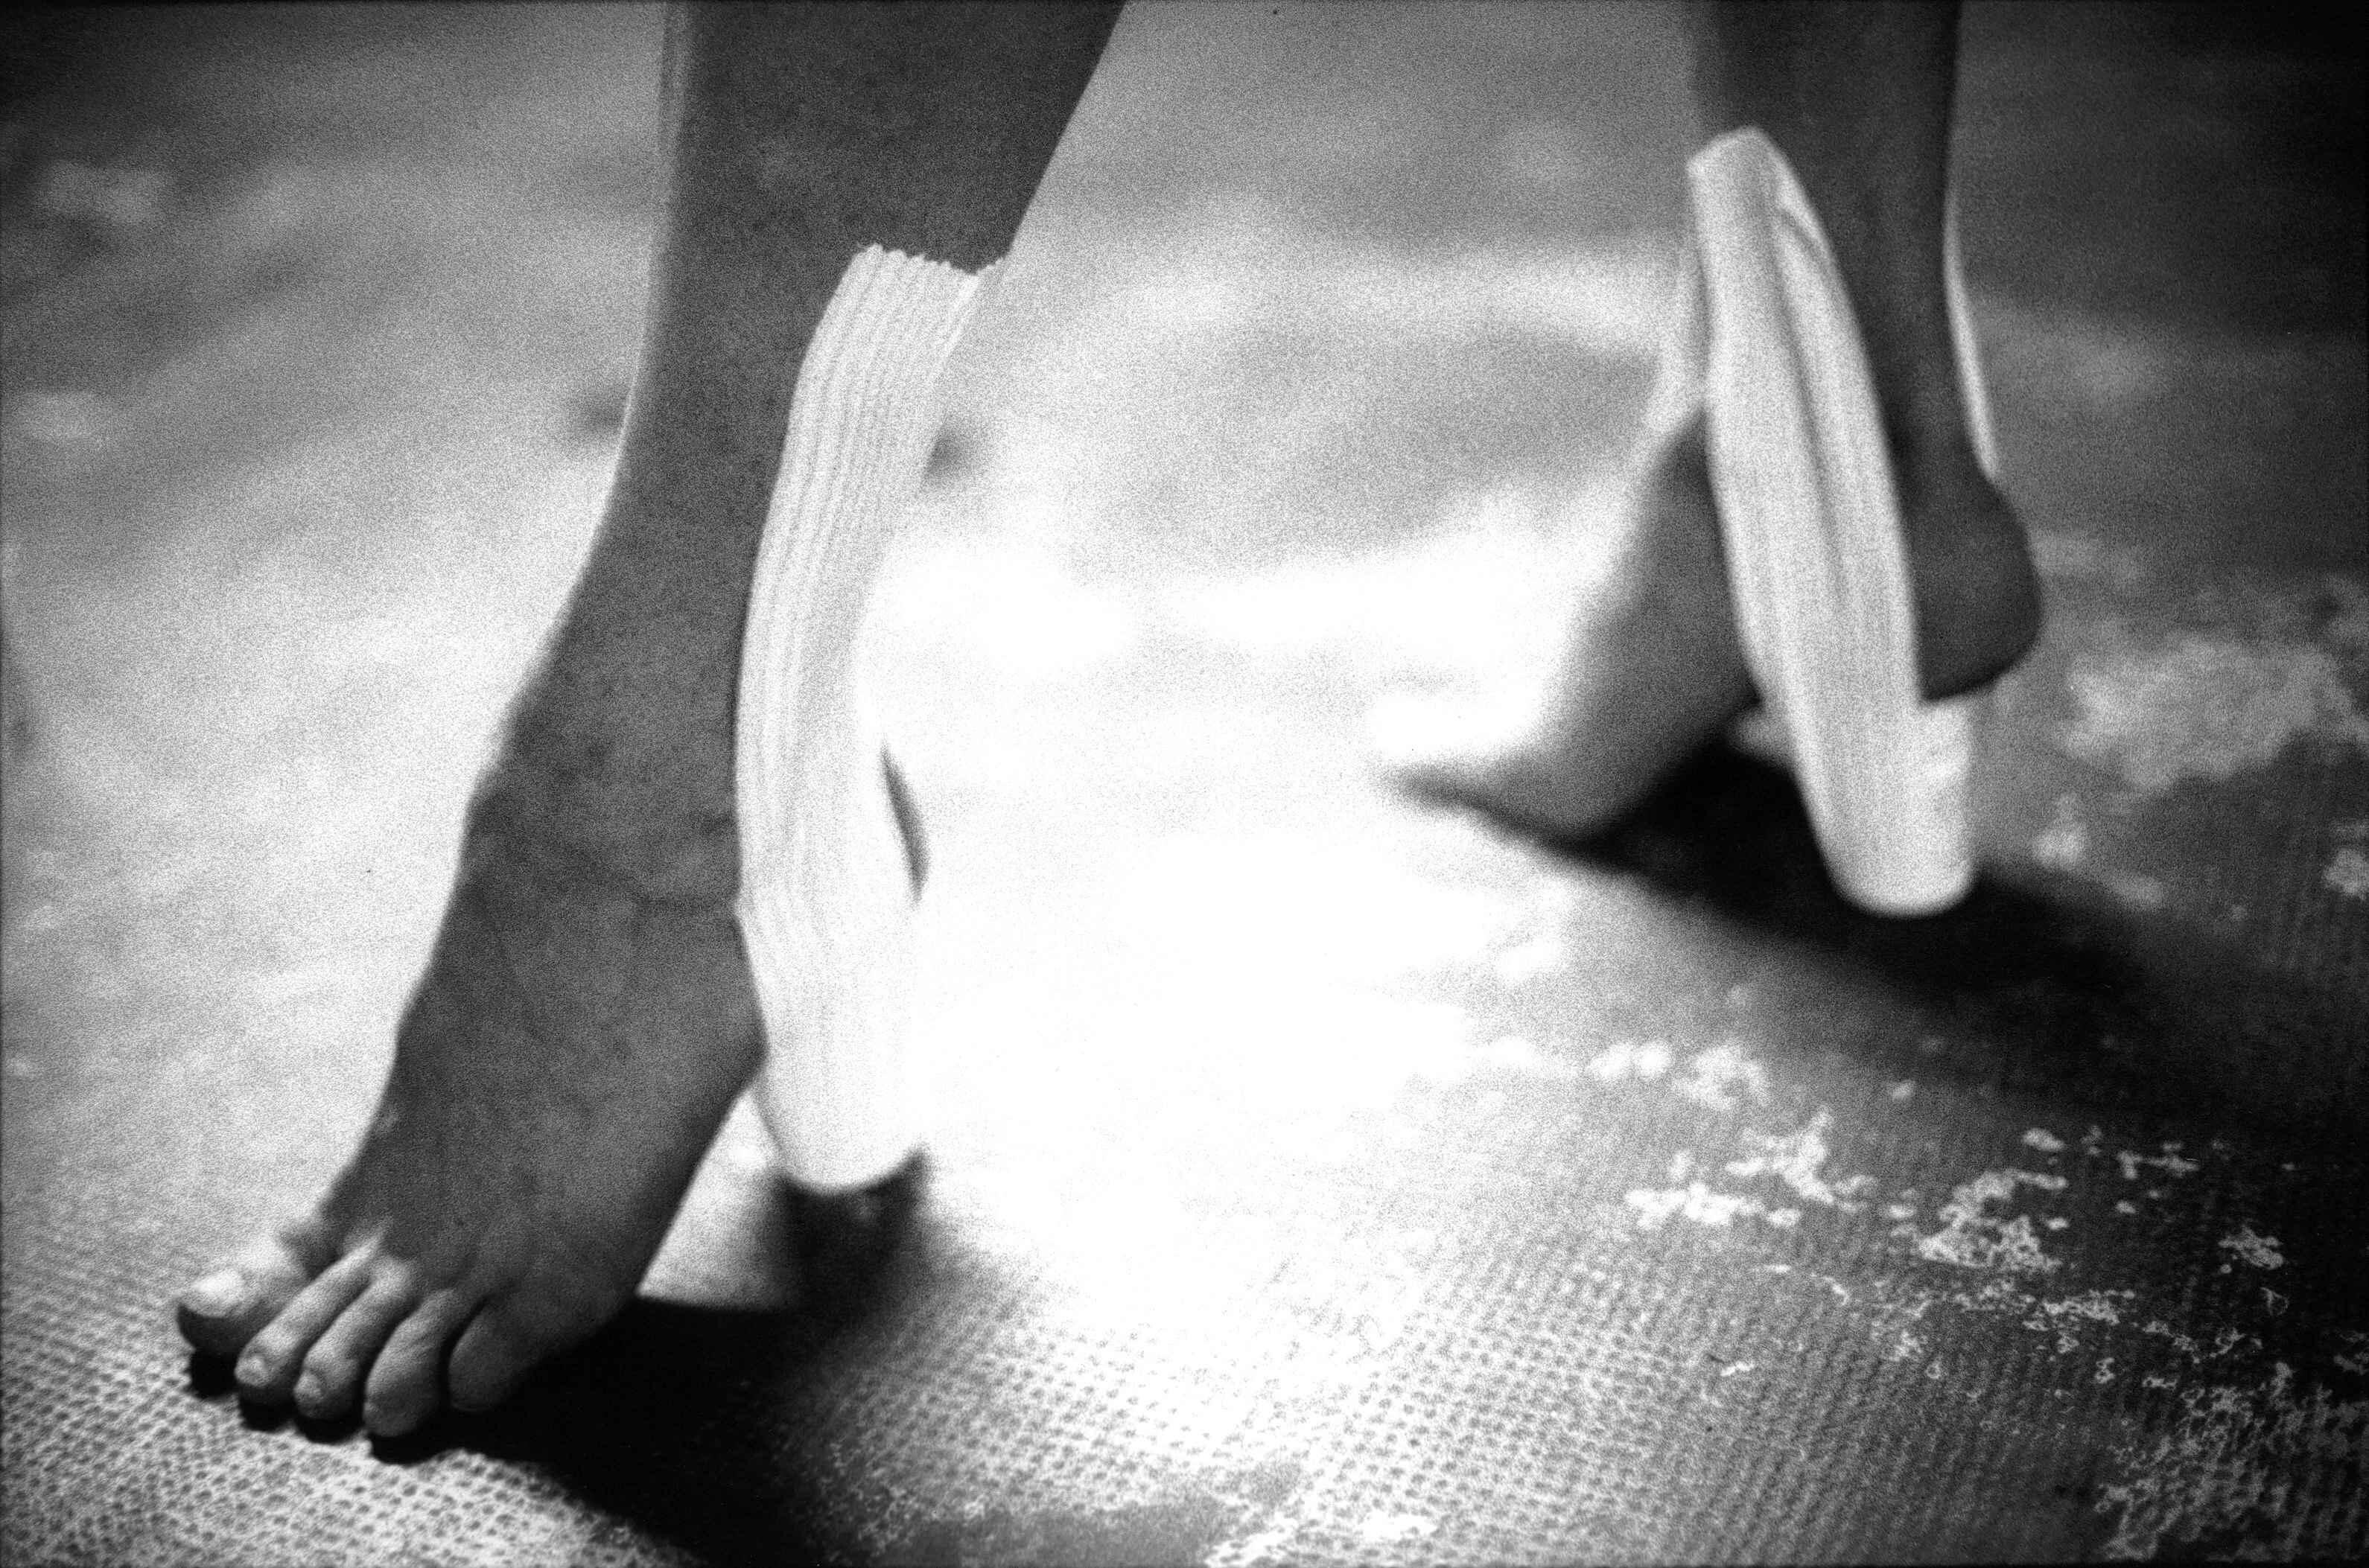 Close-up of bare feet wearing heels made from medical straps, extract from Good Boy